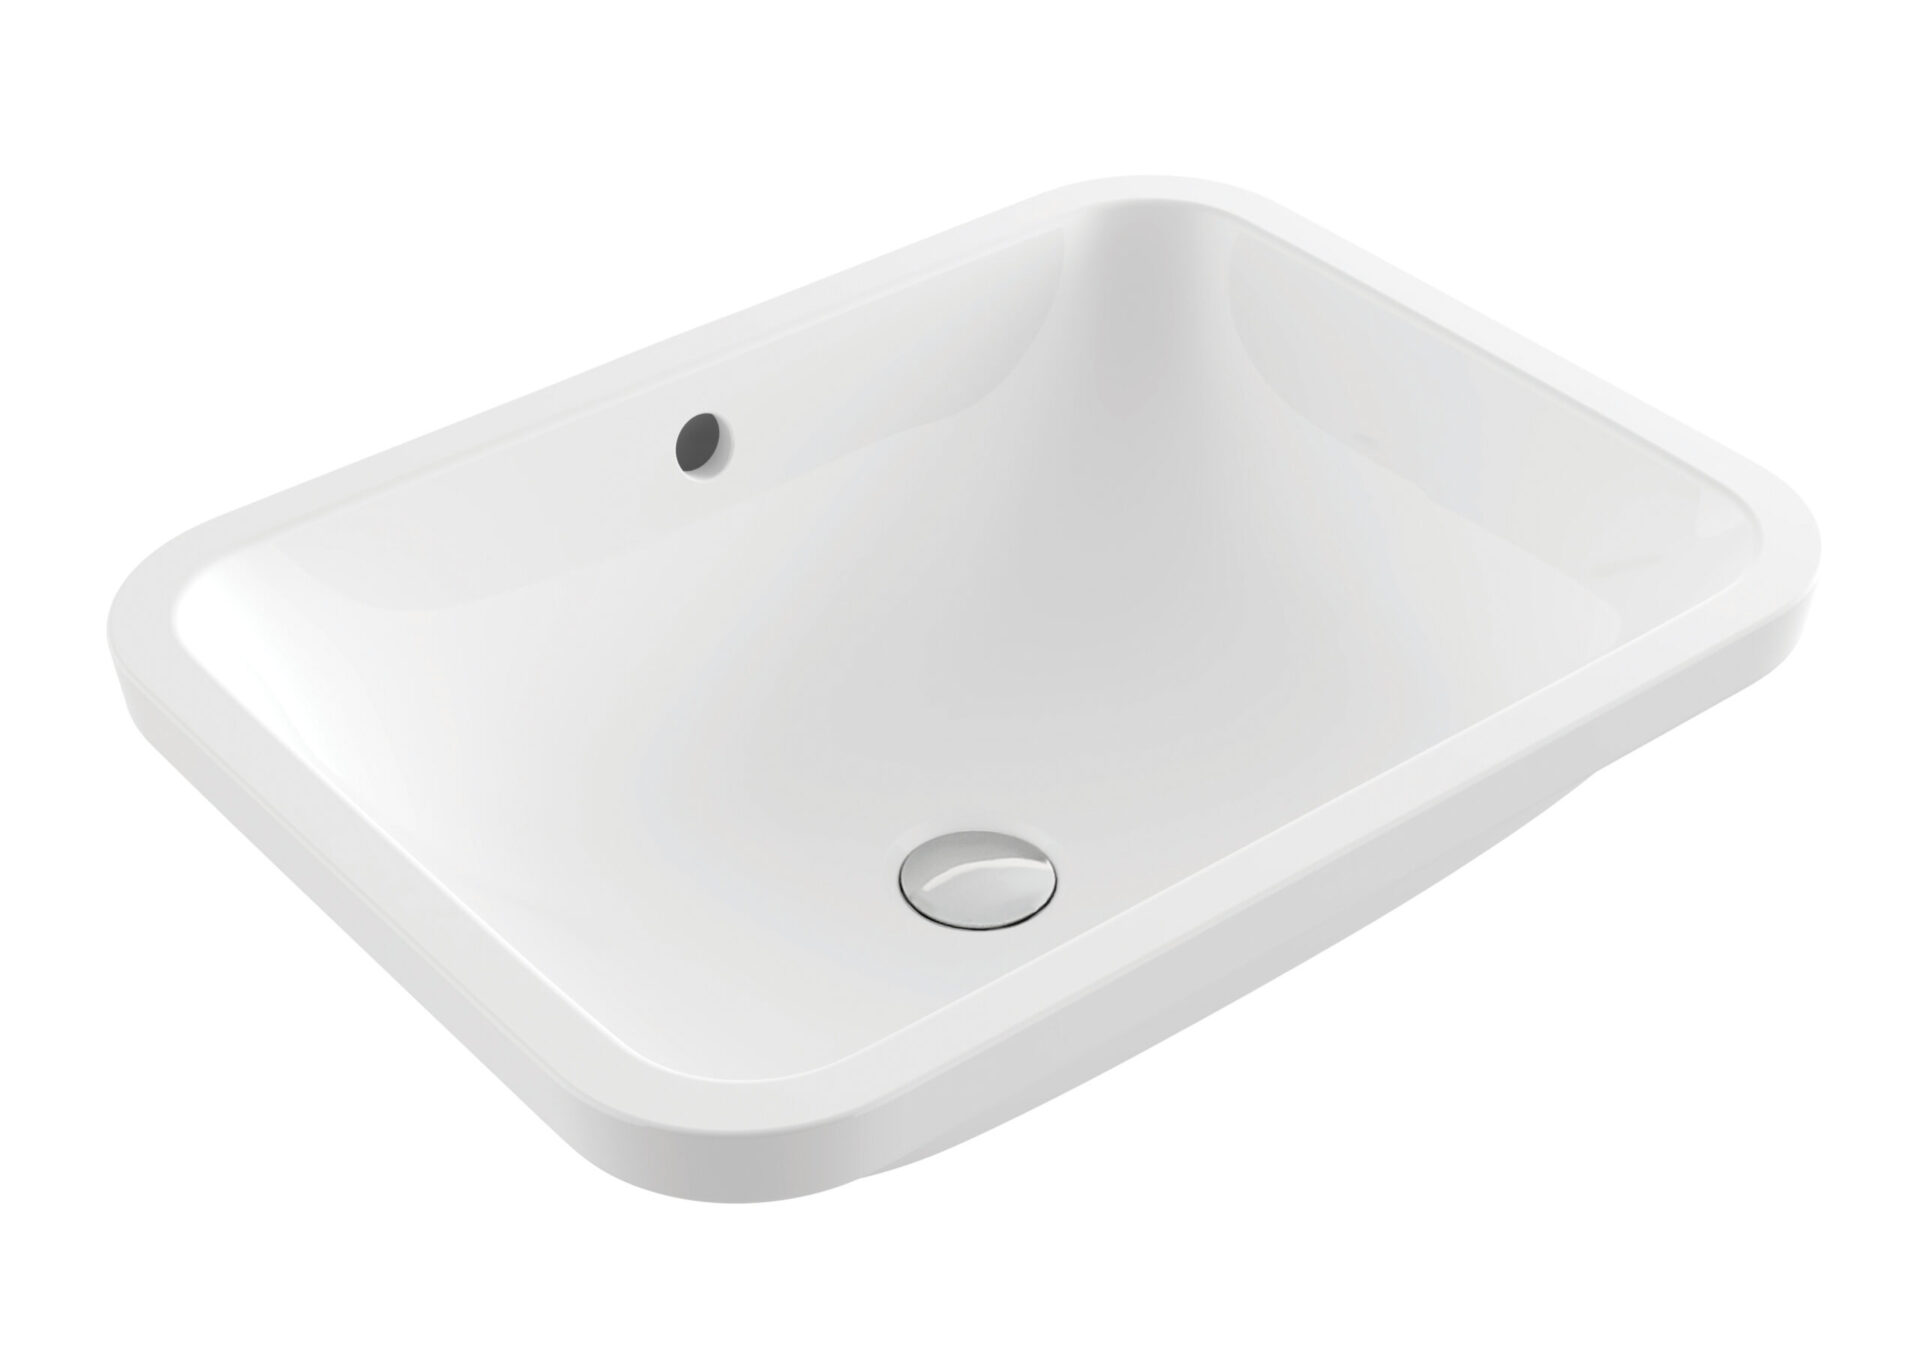 This classic under counter basin will suit any style bathroom with a custom vanity with a stone or marble benchtop. This is a larger size basin that is available in a range of finishes which makes this a very versatile undercounter basin.